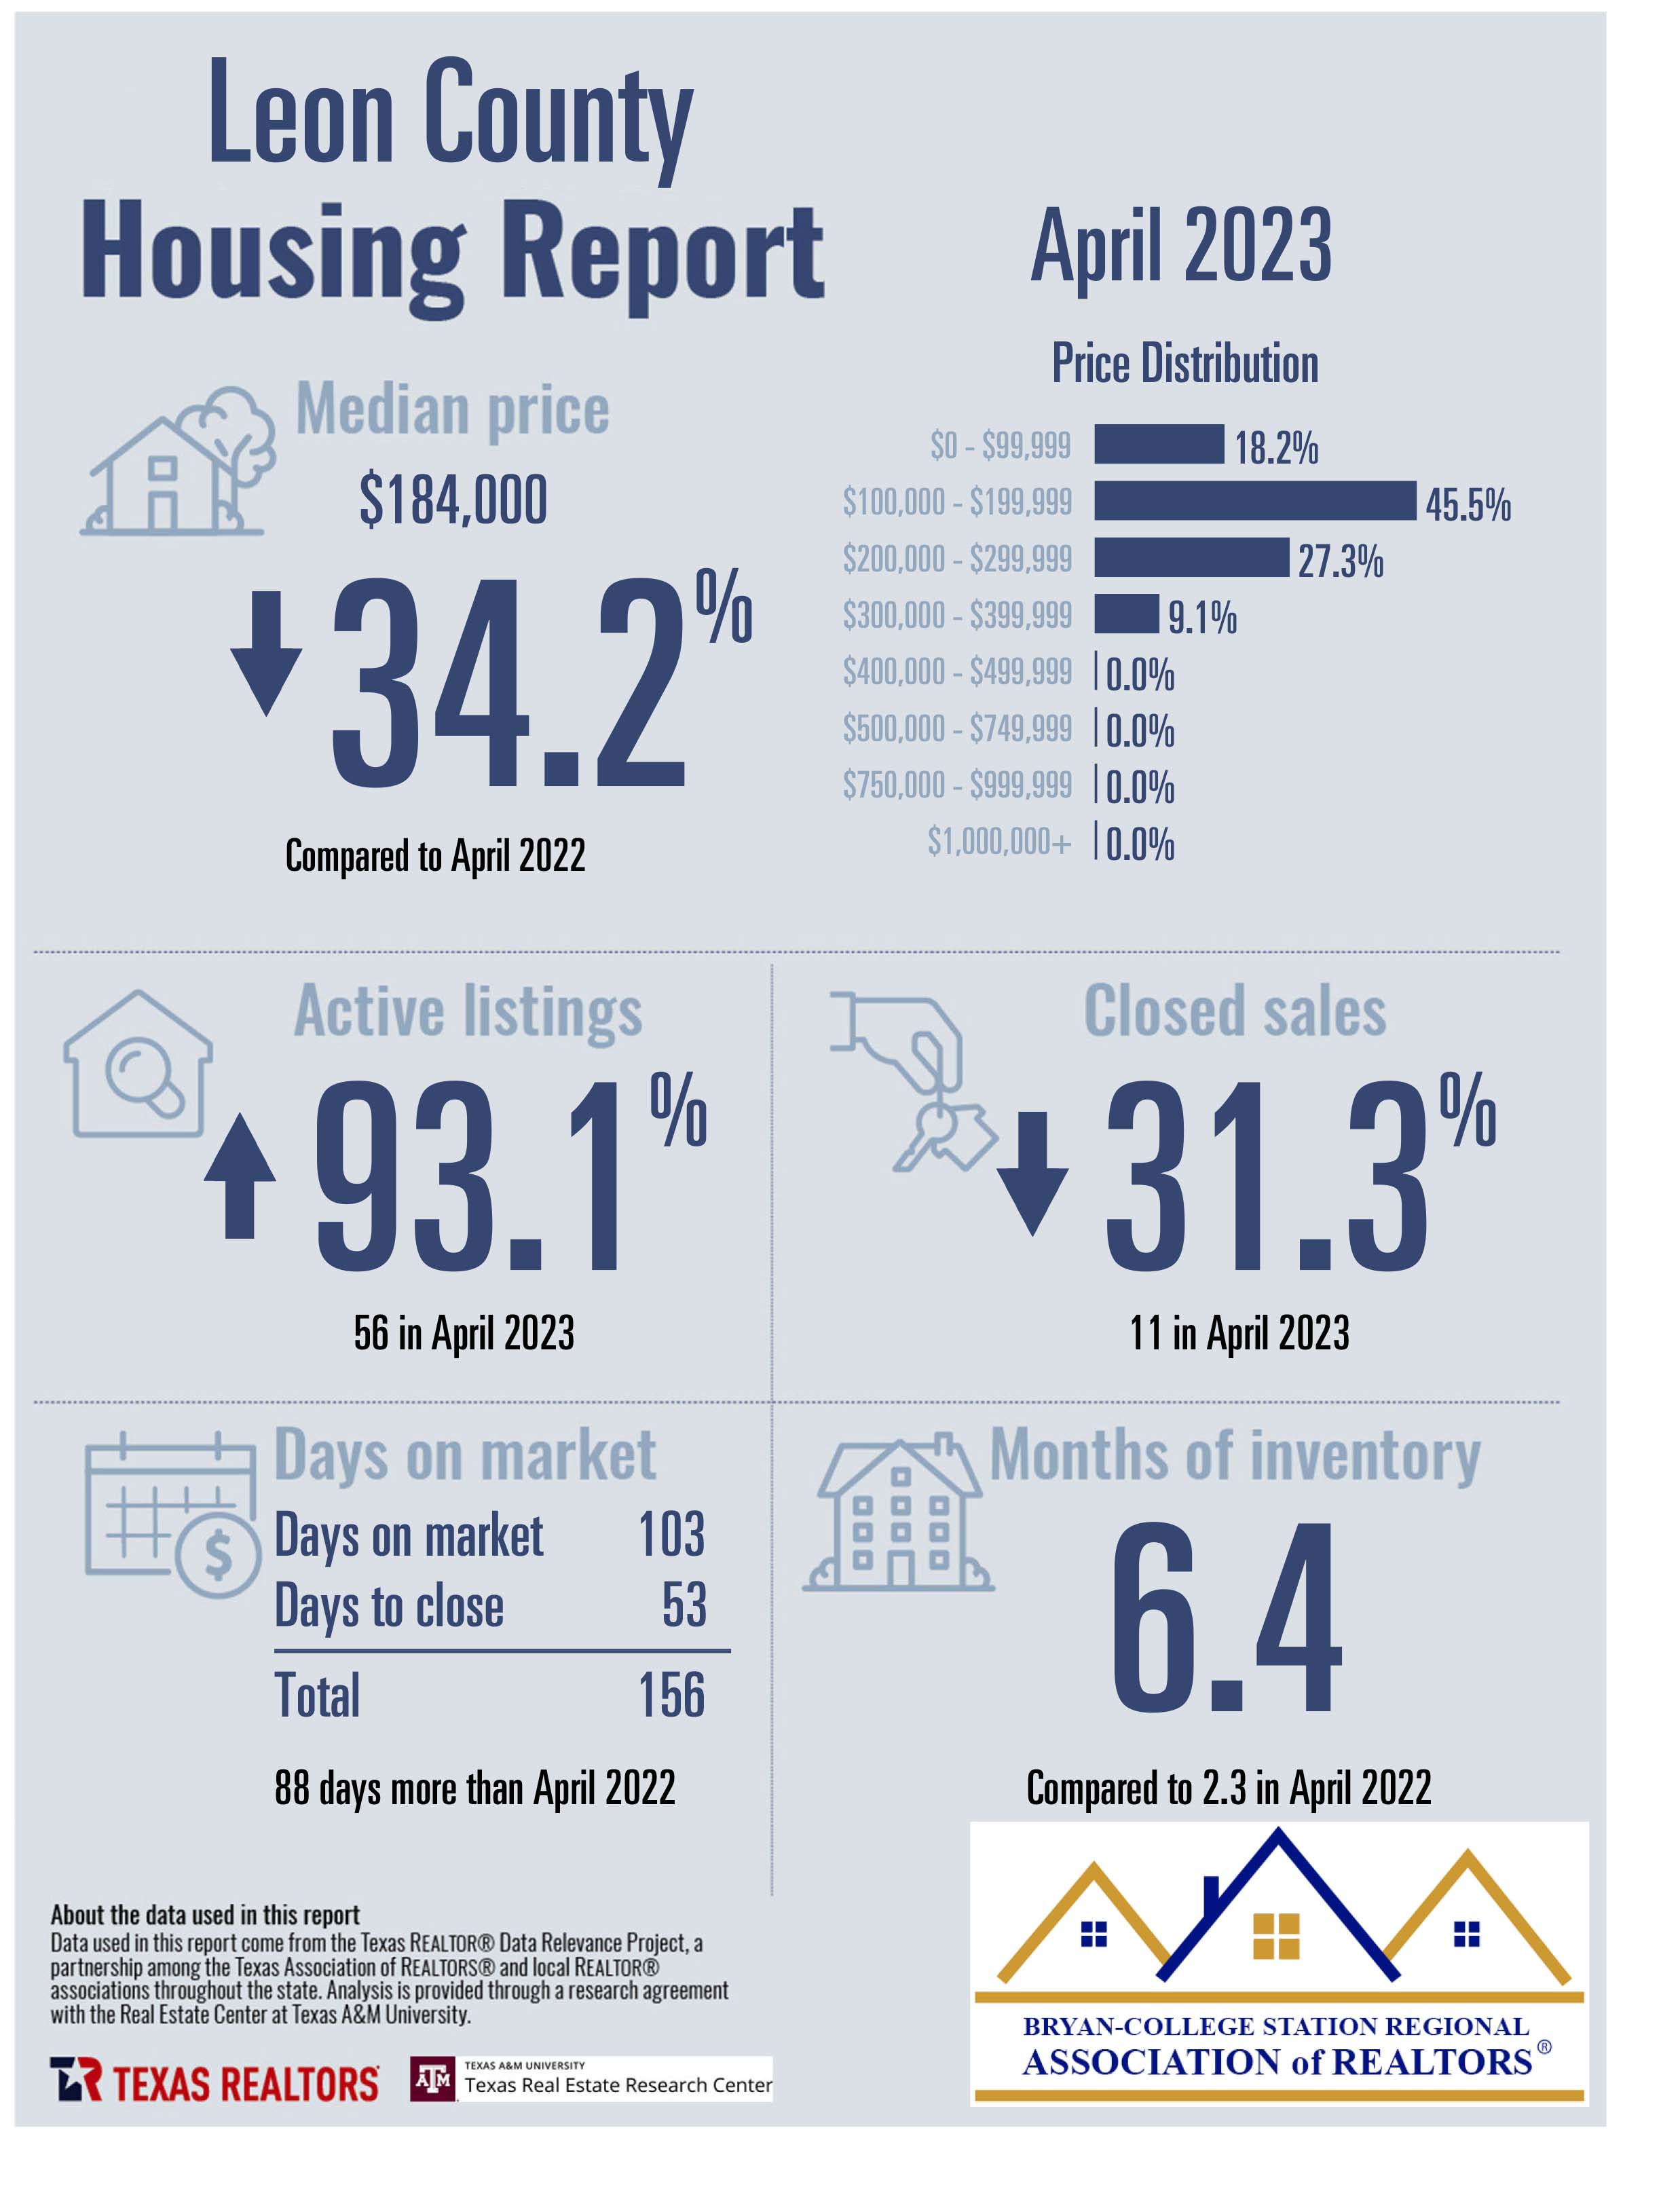 Residential Home Sale Report april 2023 - Leon